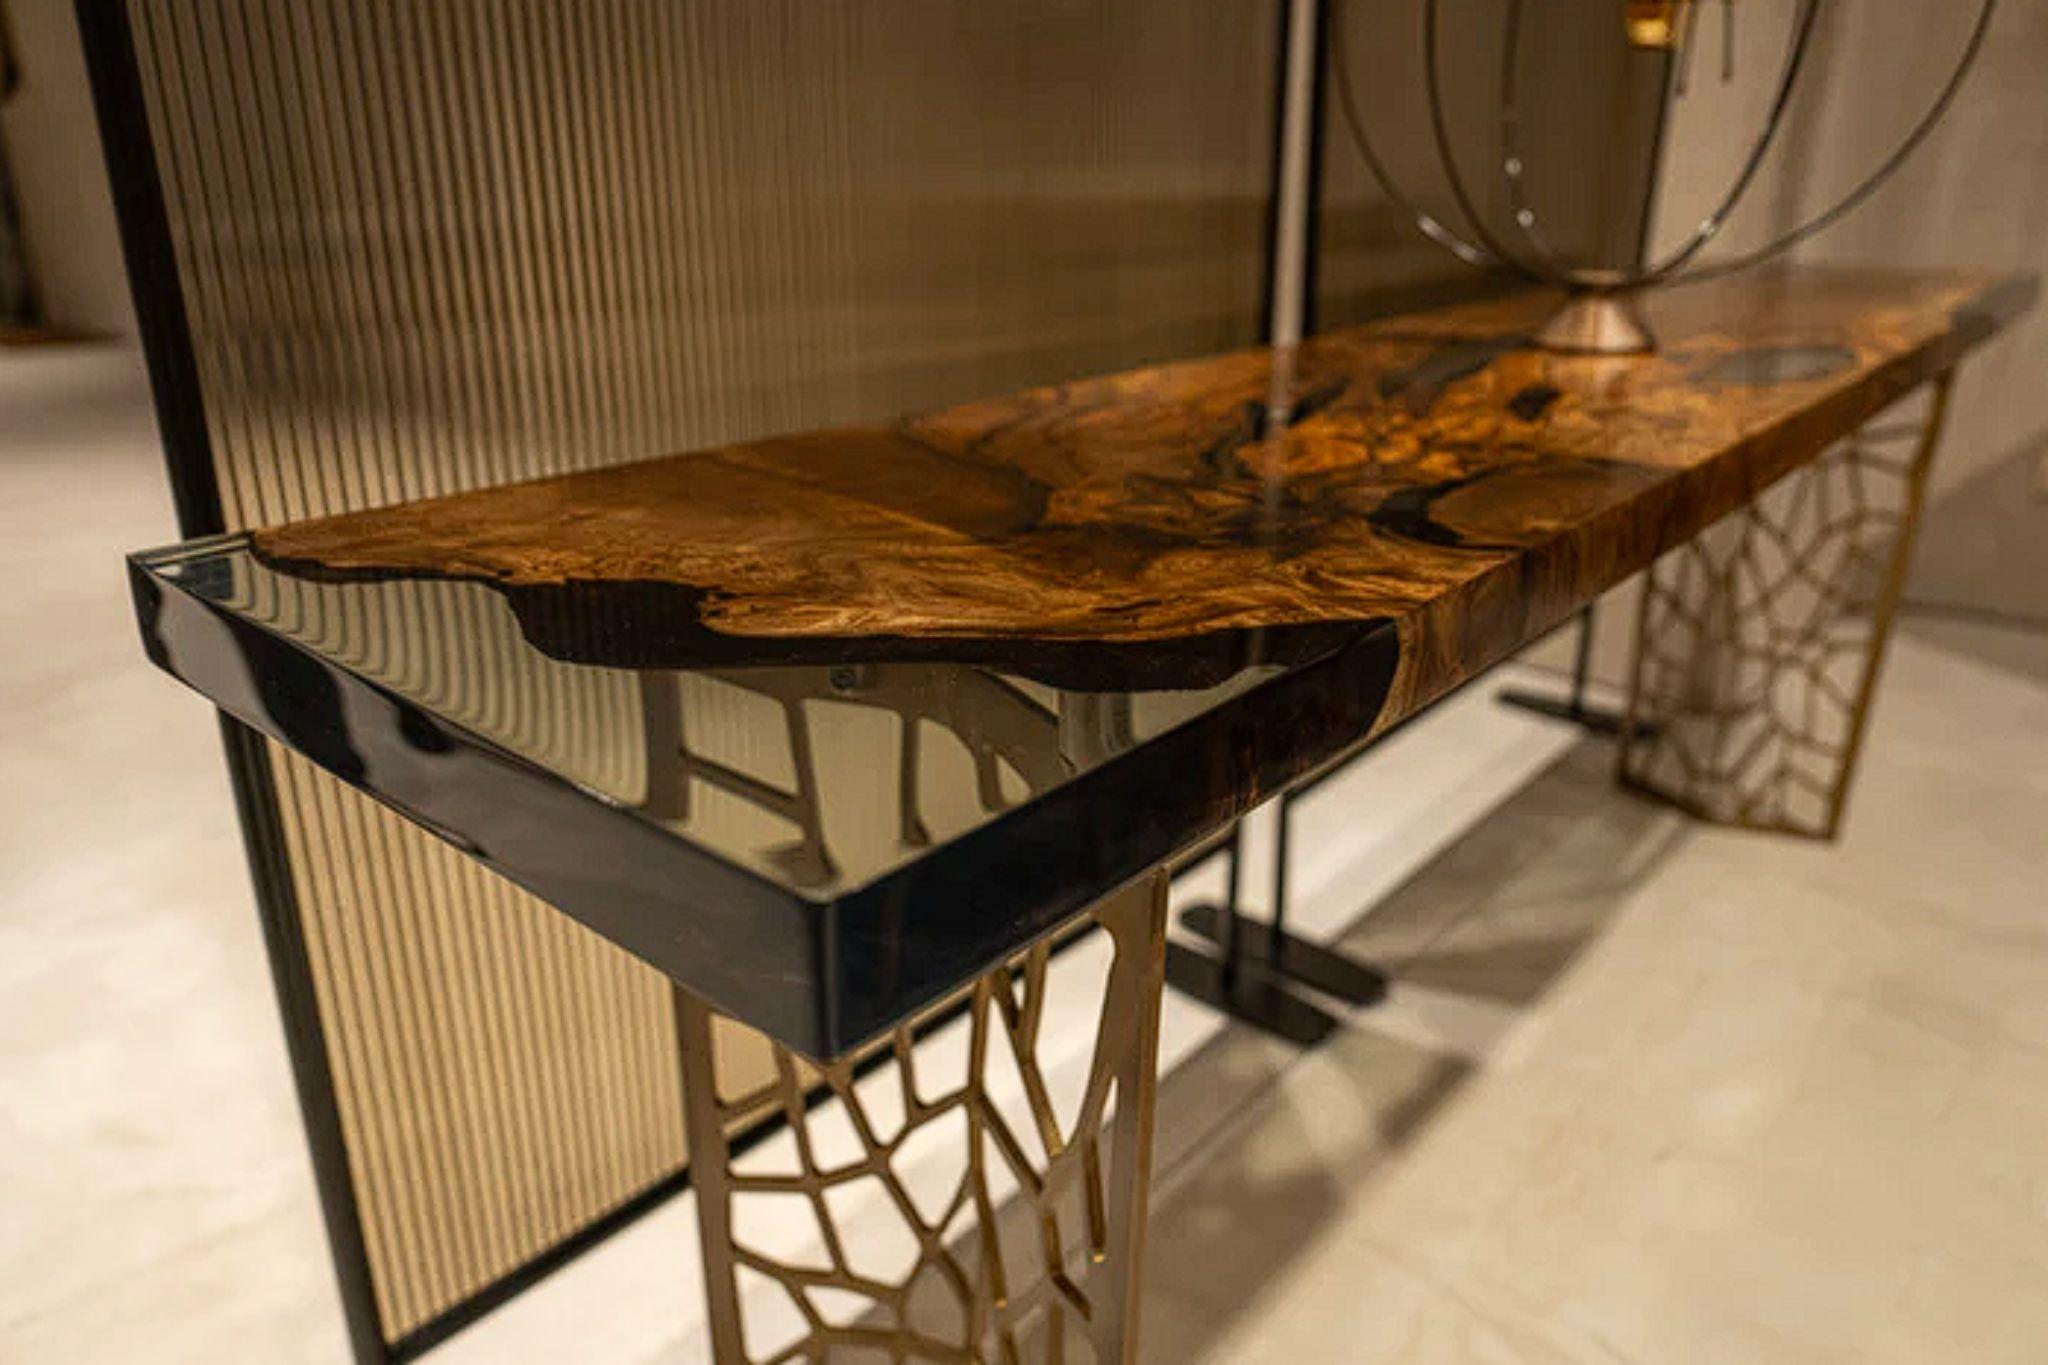 Crafted from premium-quality walnut wood, the EFIL console boasts a unique design that beautifully blends the natural wood with crystal-clear resin epoxy. 

The console also features sleek aluminum metal legs that add a touch of modernity to the